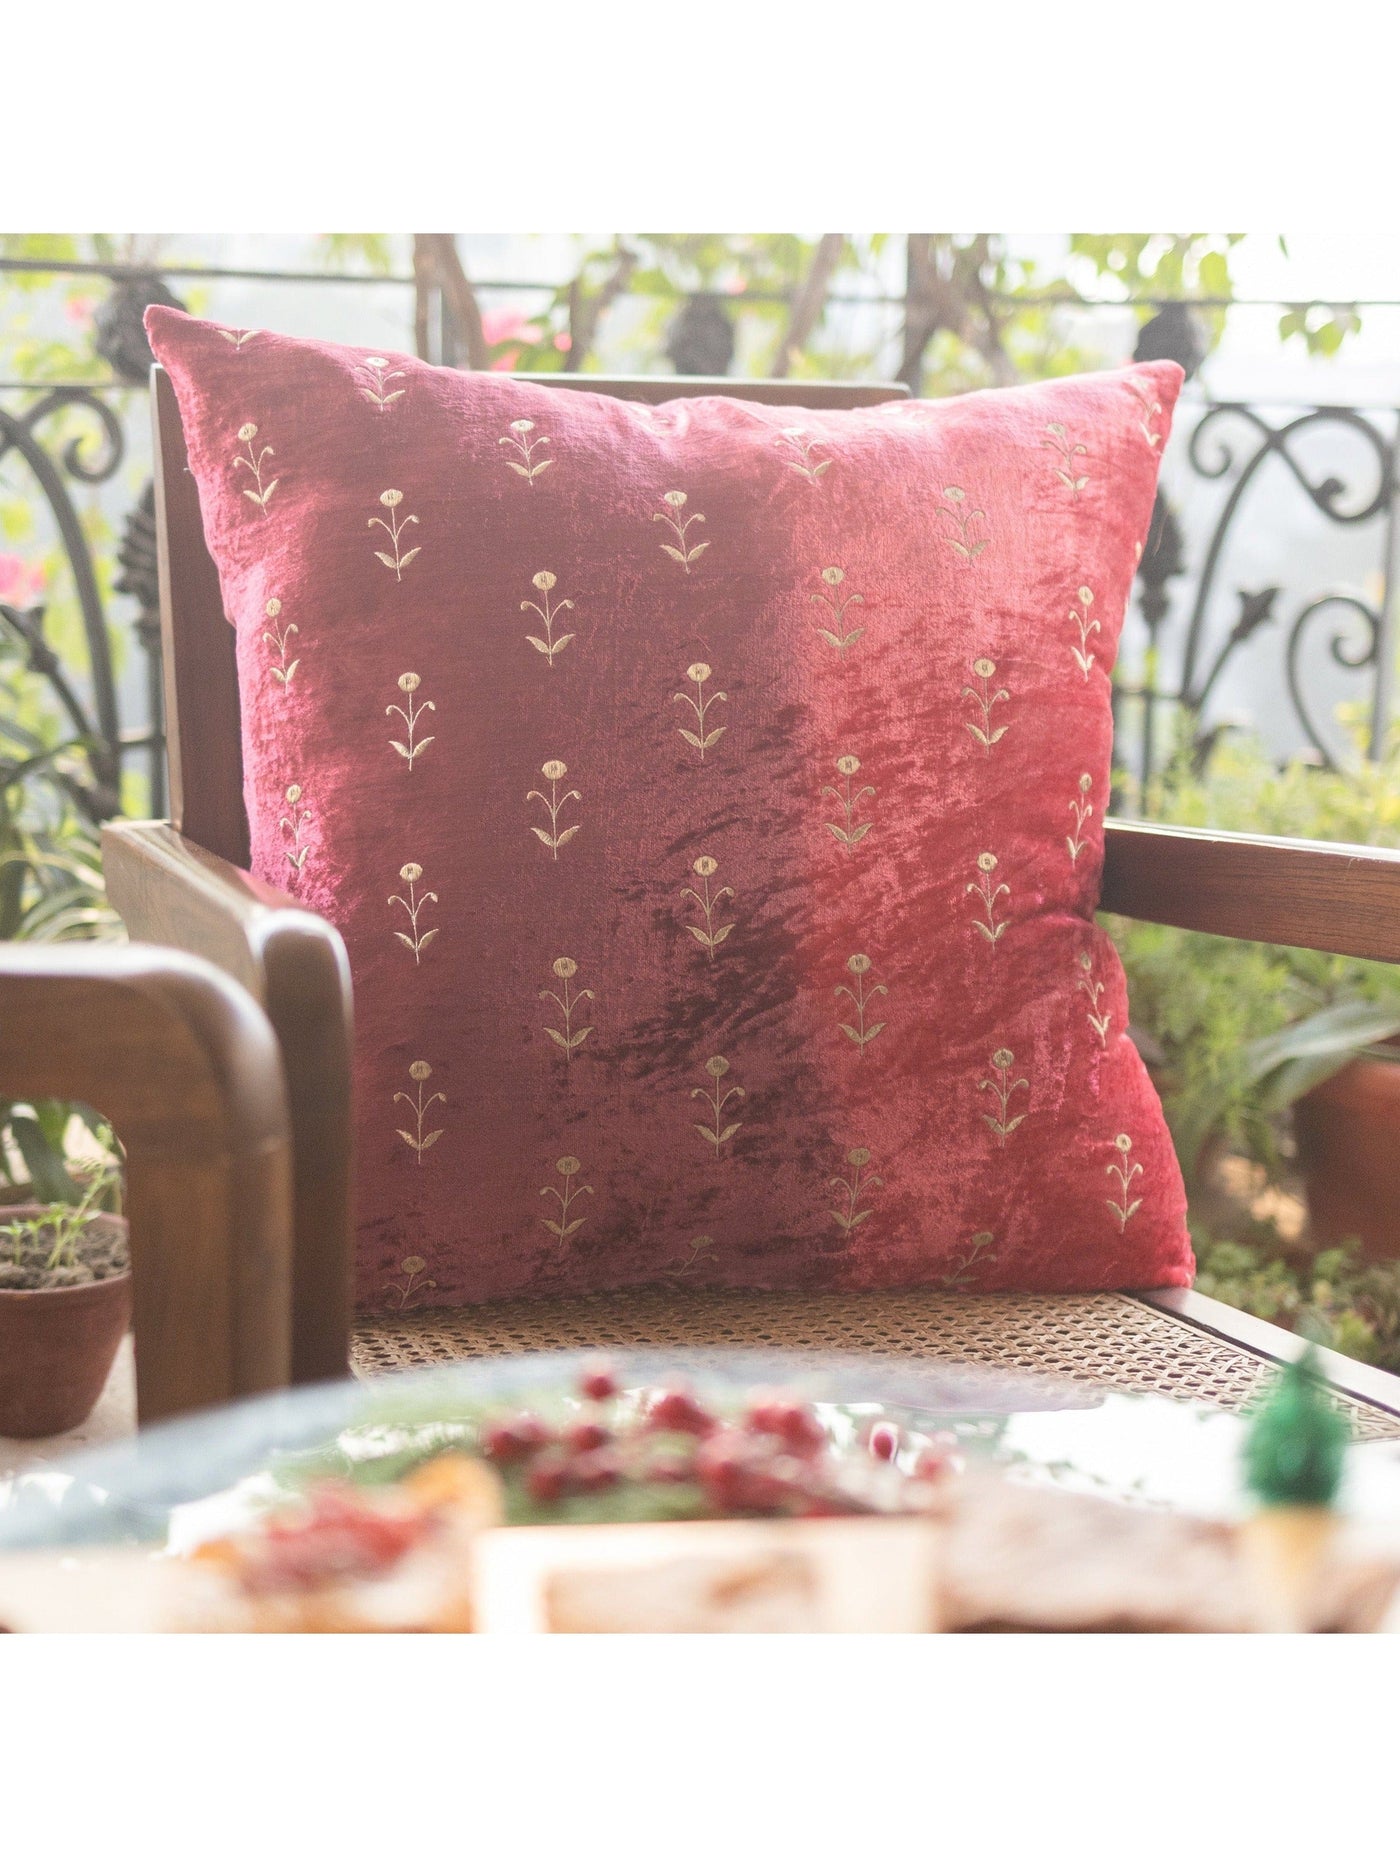 Ombre Cushion Cover Plum